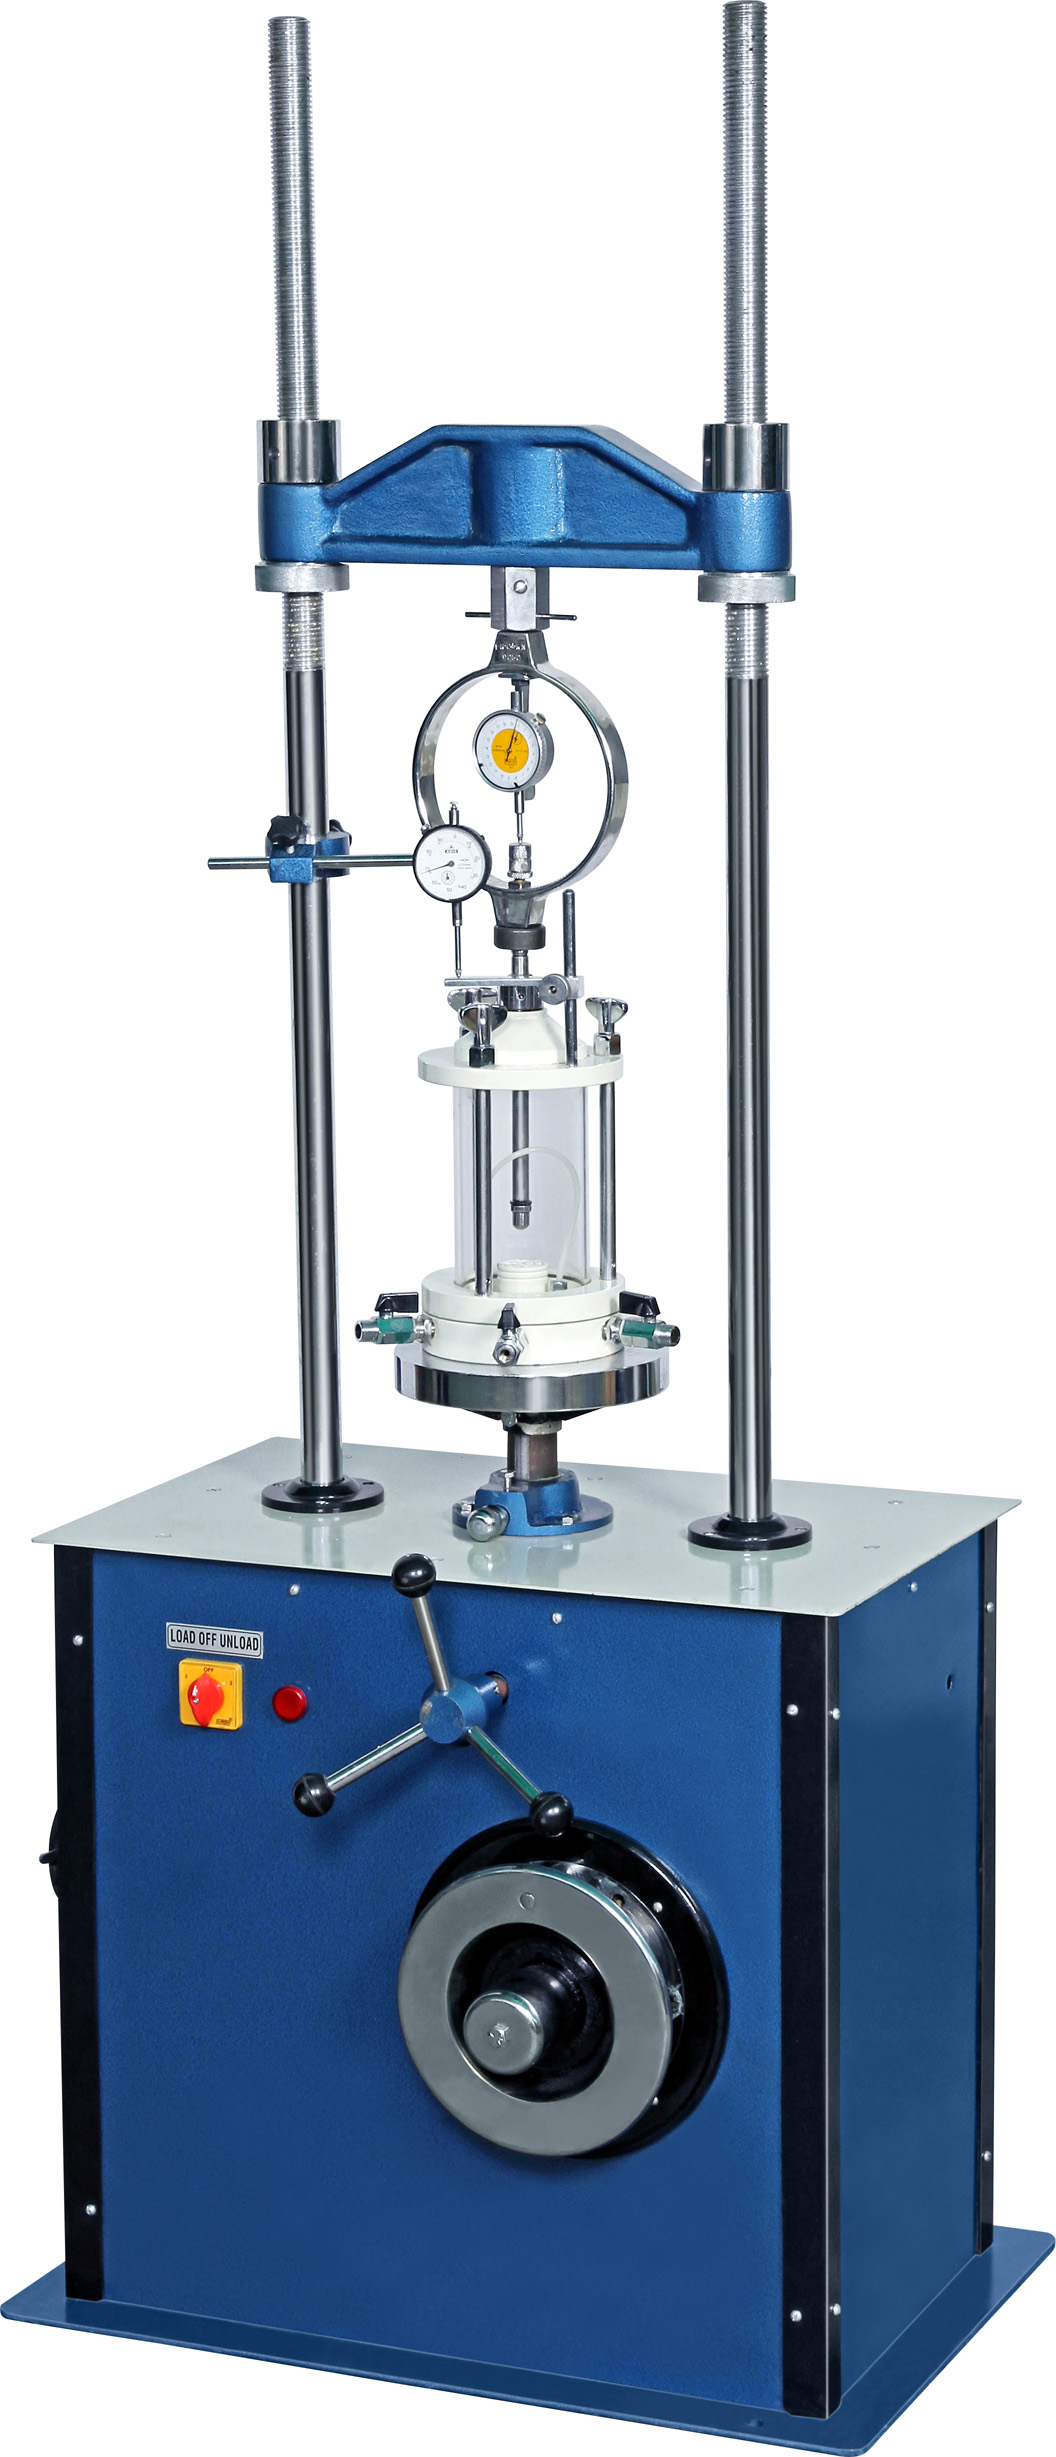 TRIAXIAL SHEAR TEST APPARATUS - FOR 38MM DIA SPECIMEN - WITH ACCESSORIES FOR UU, CD AND CU.